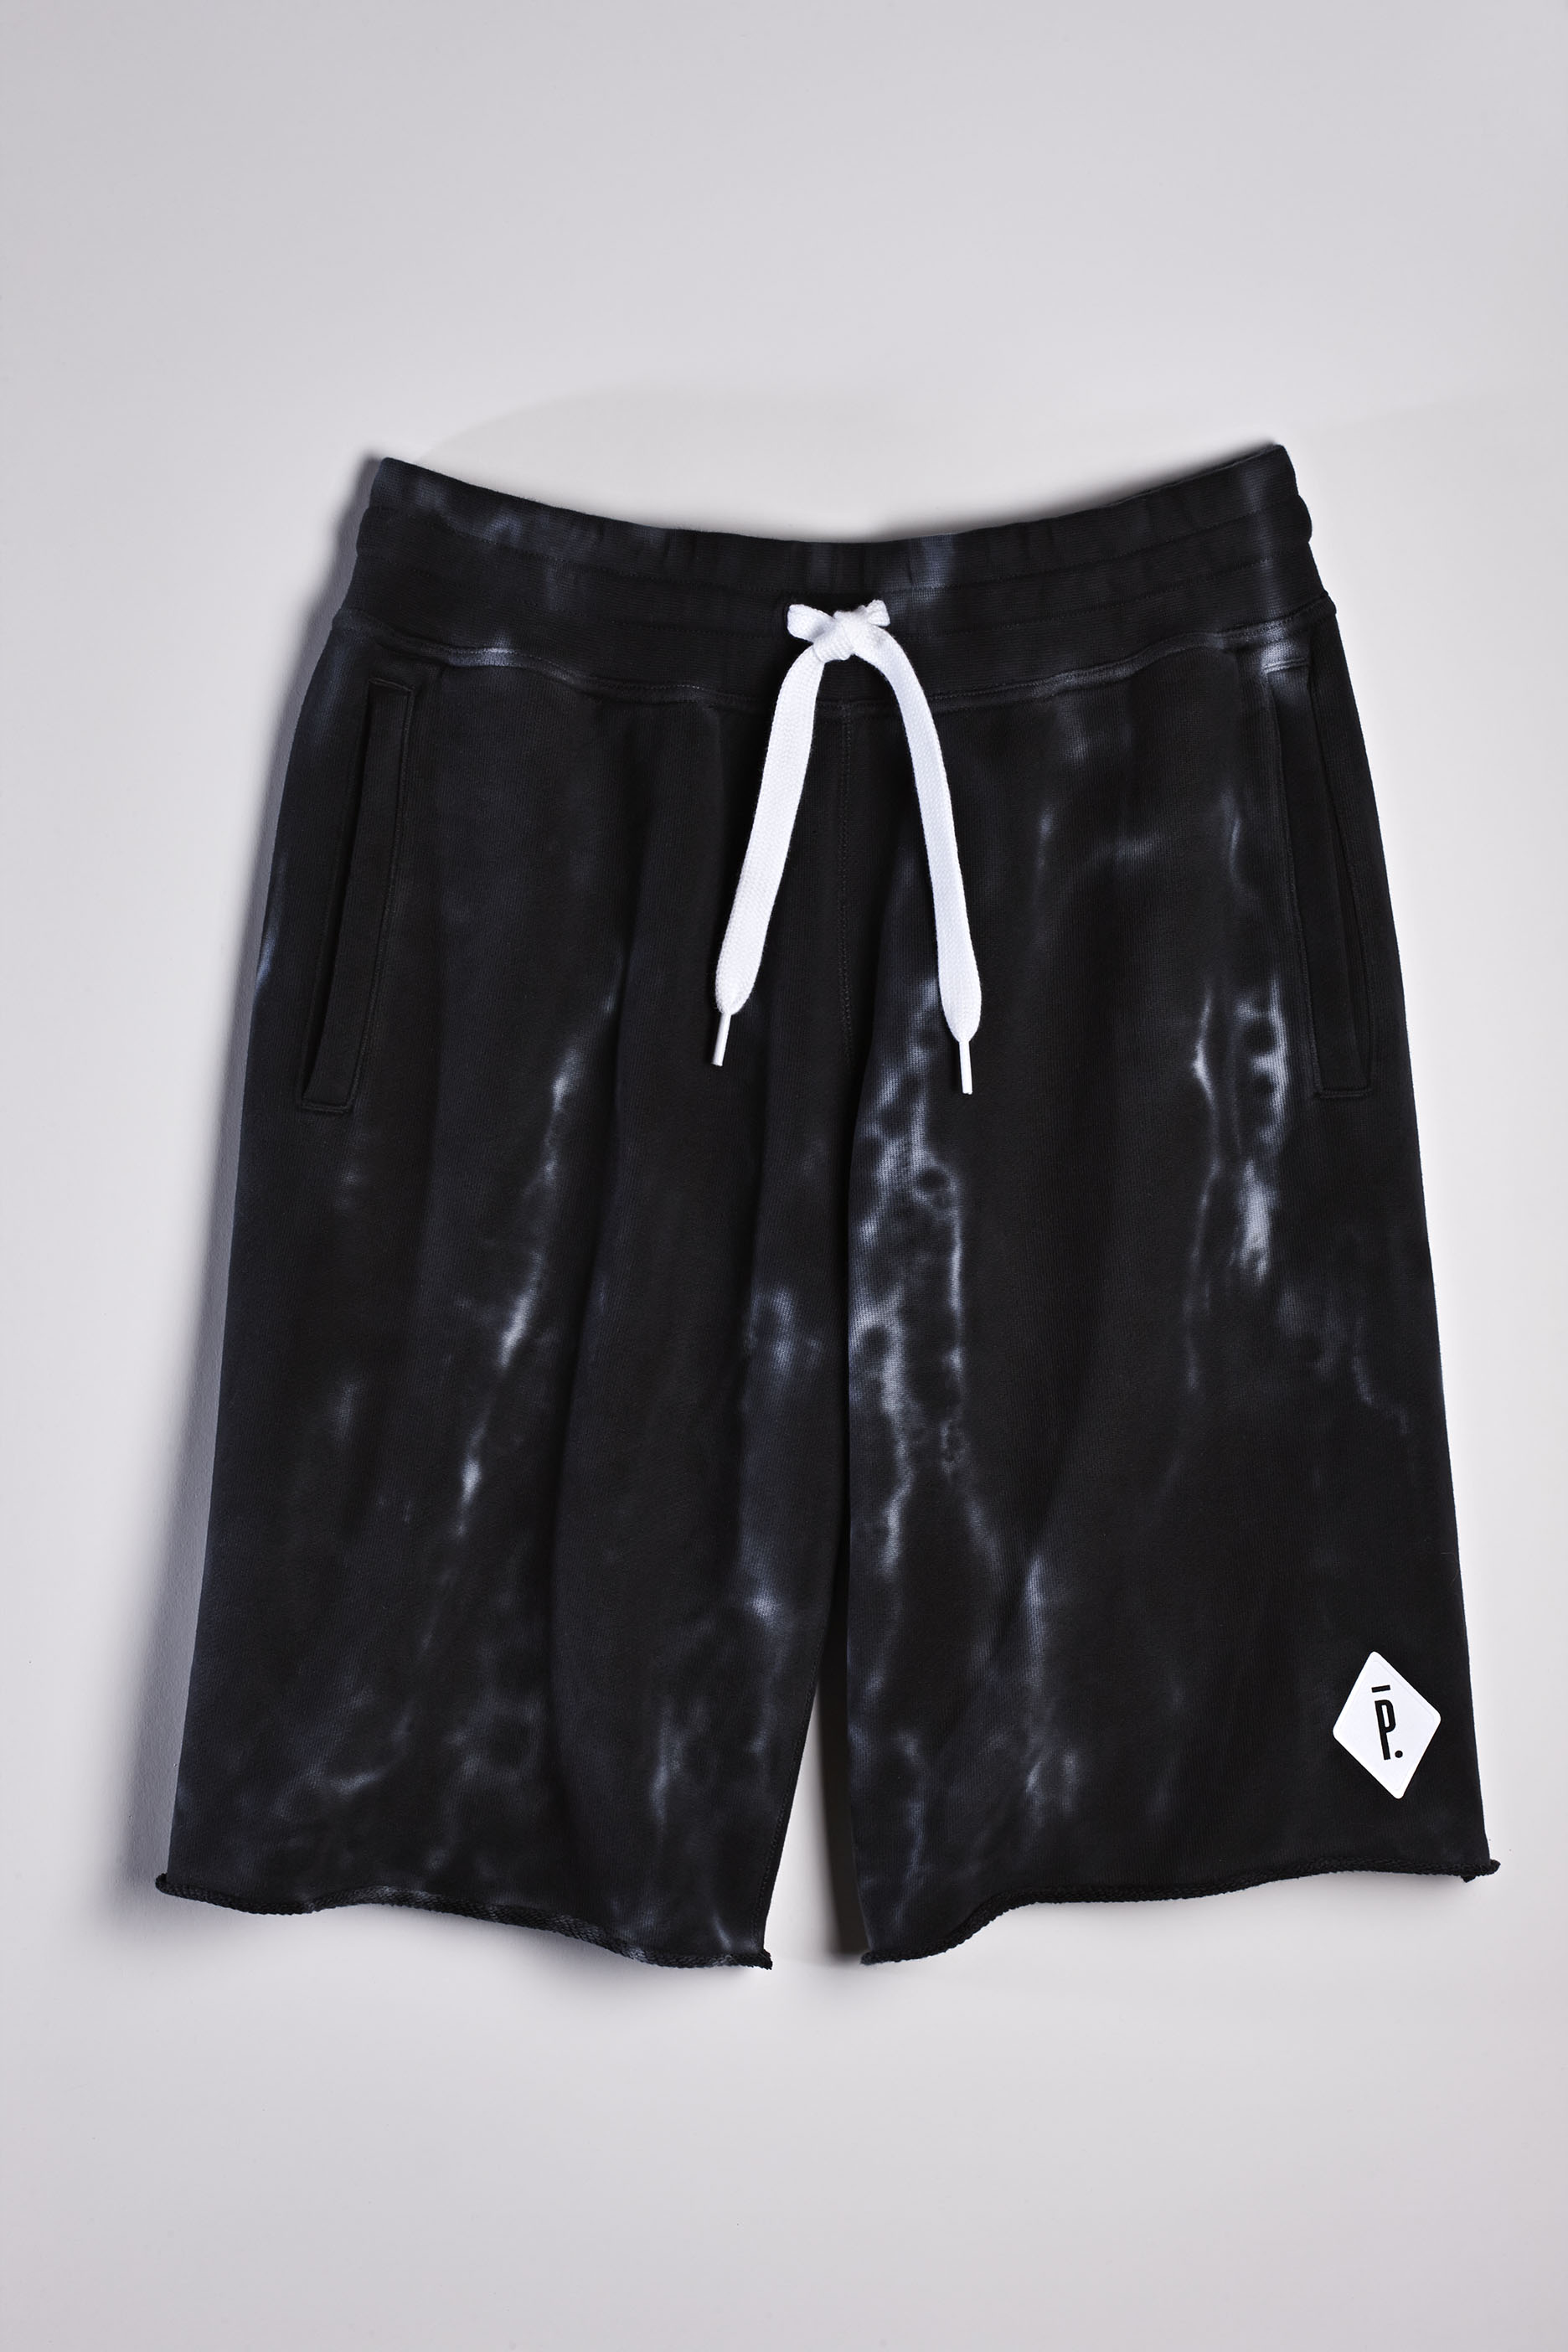 1397590329_nike_pigalle_shorts_blk